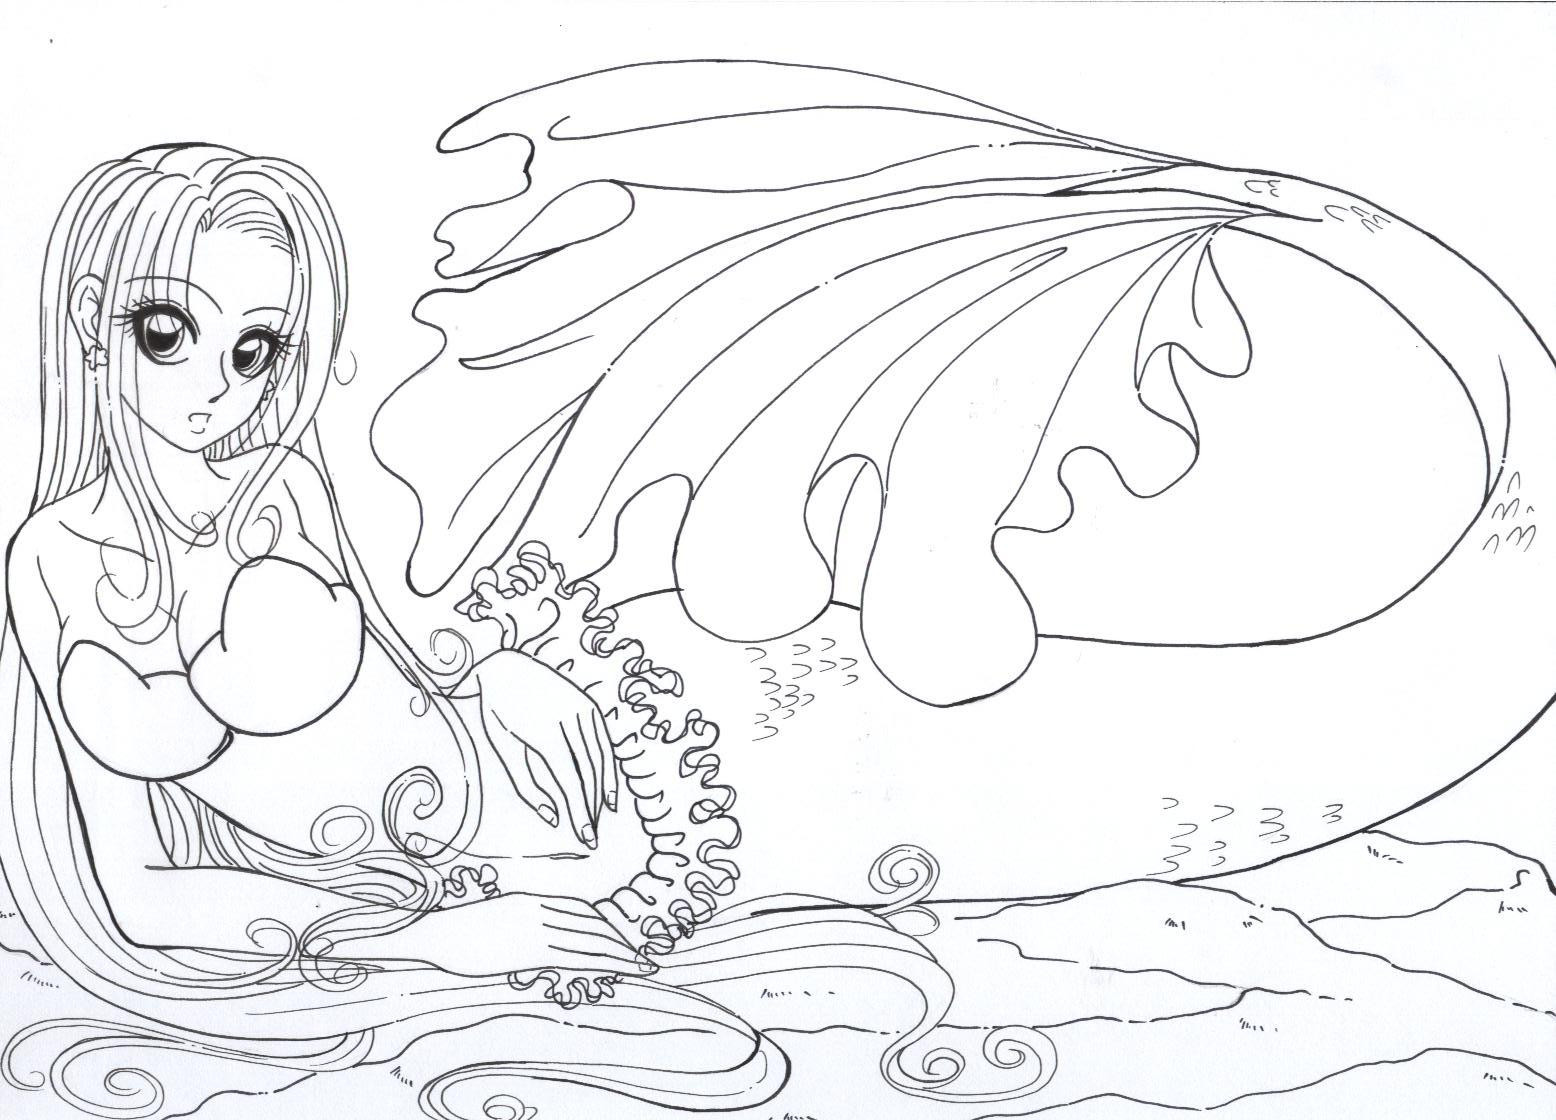 Anime Mermaid Coloring Pages
 Mermaid Colour me by resiove on DeviantArt